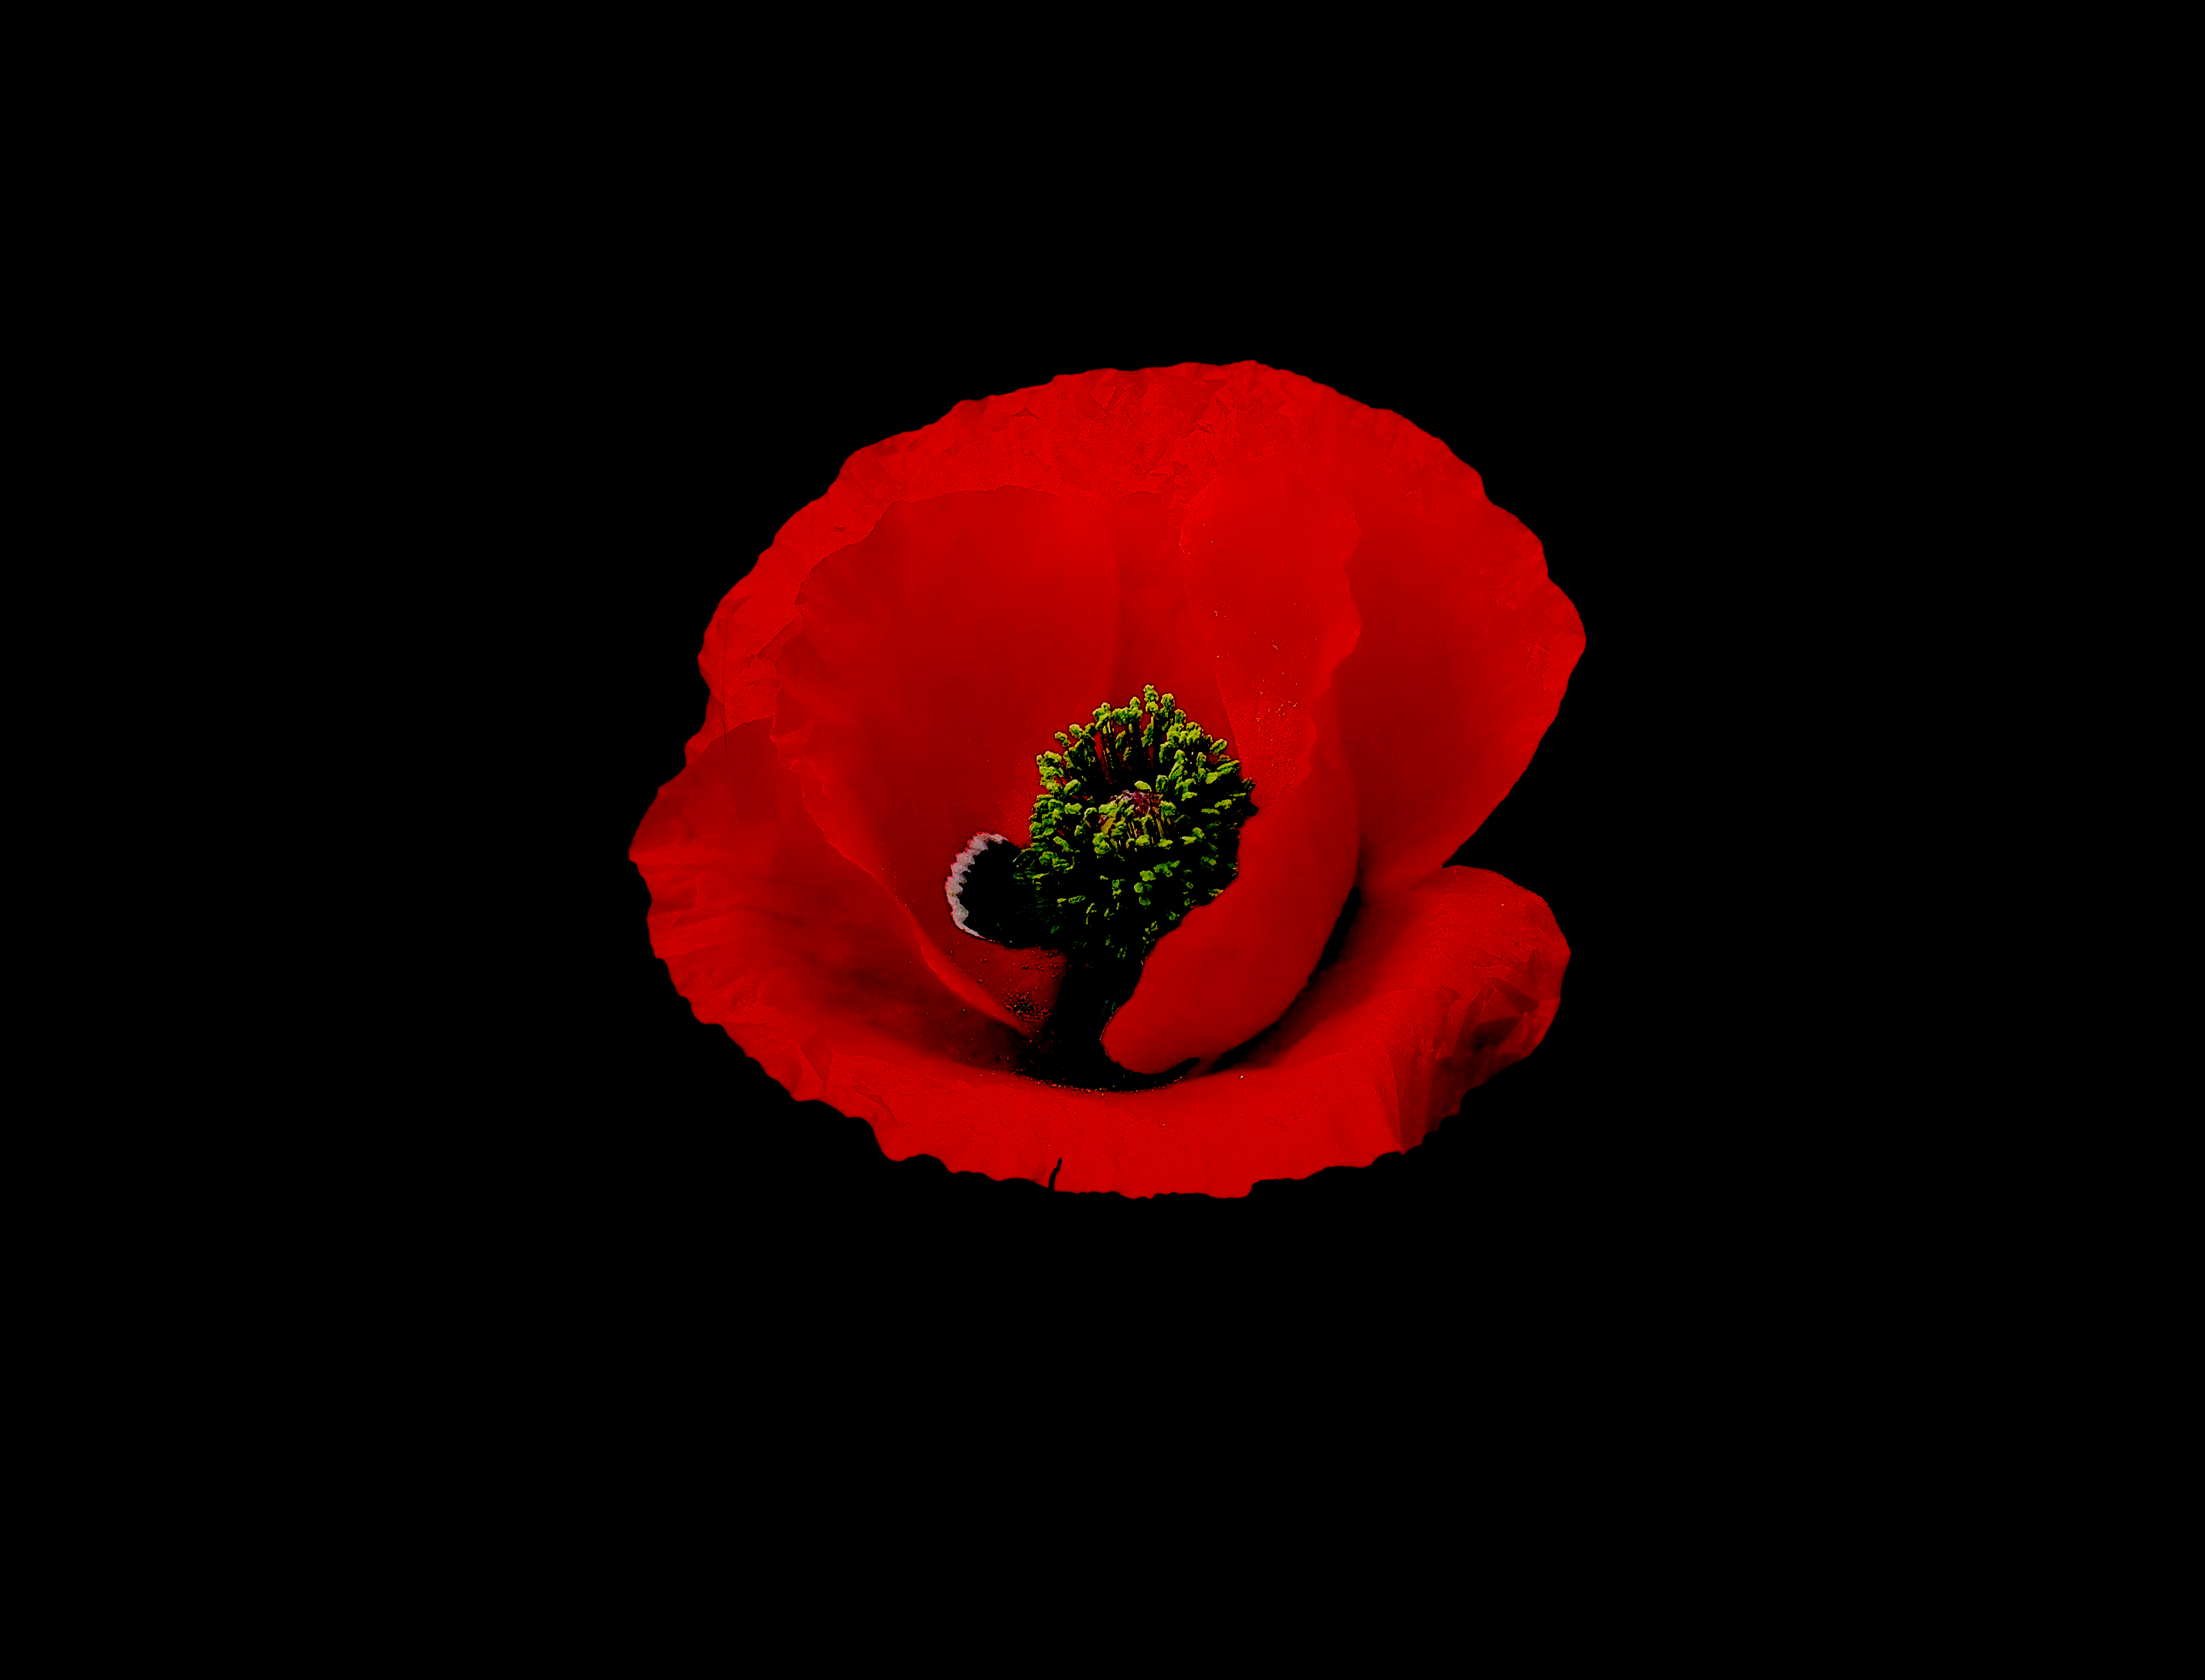 Red poppy flower at Black background free image download